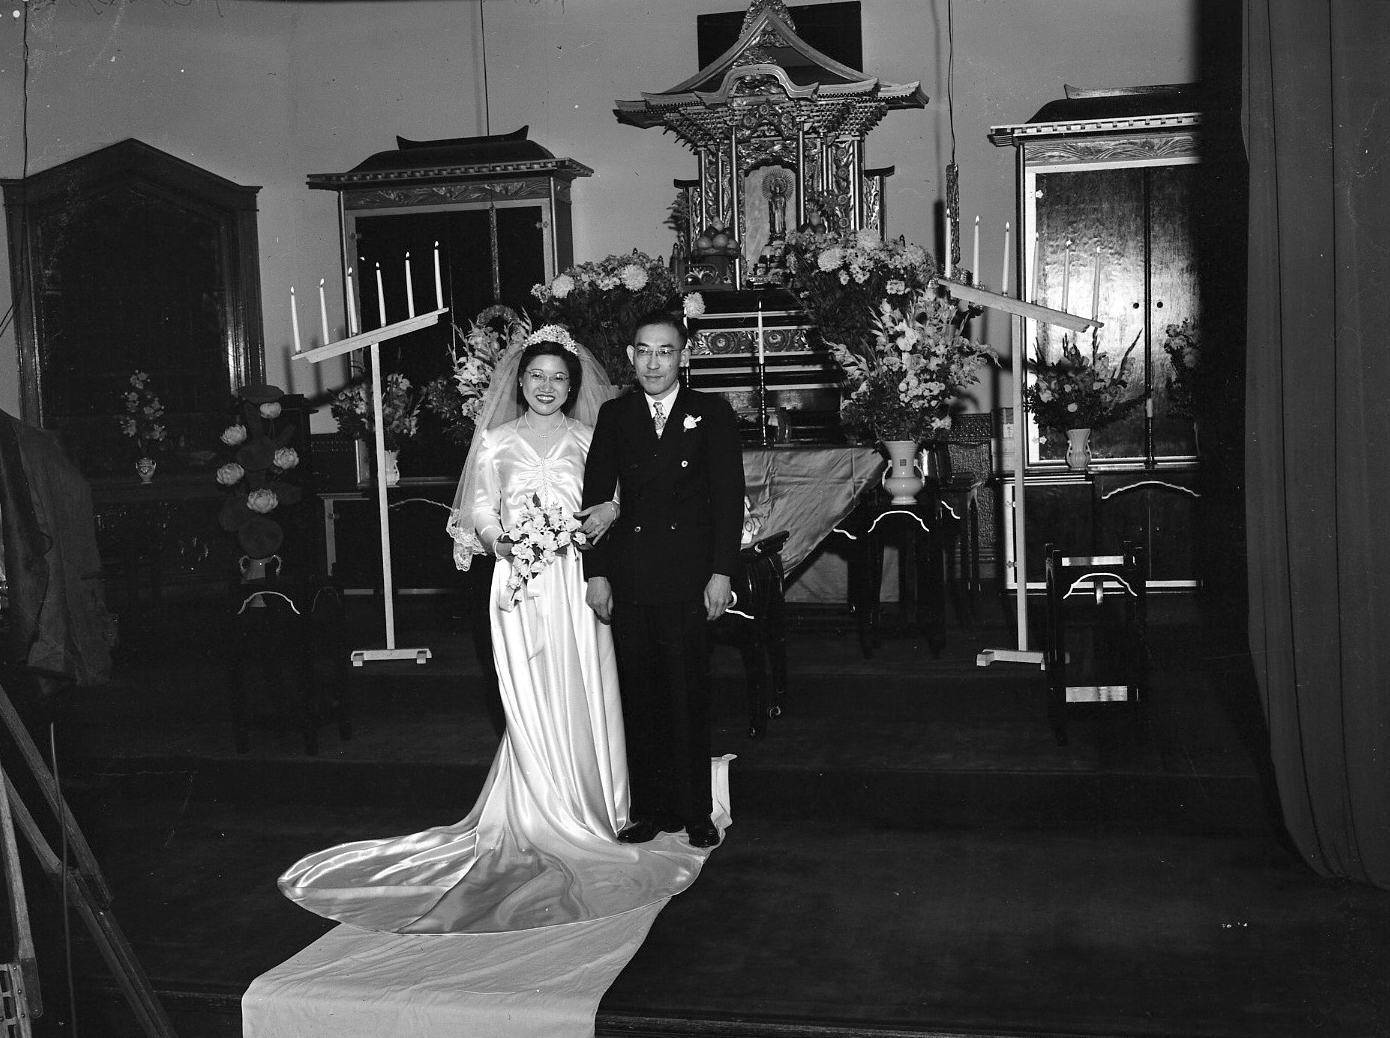 James and Mary Numata’s wedding, September 24, 1950, at the Chicago Buddhist Church.